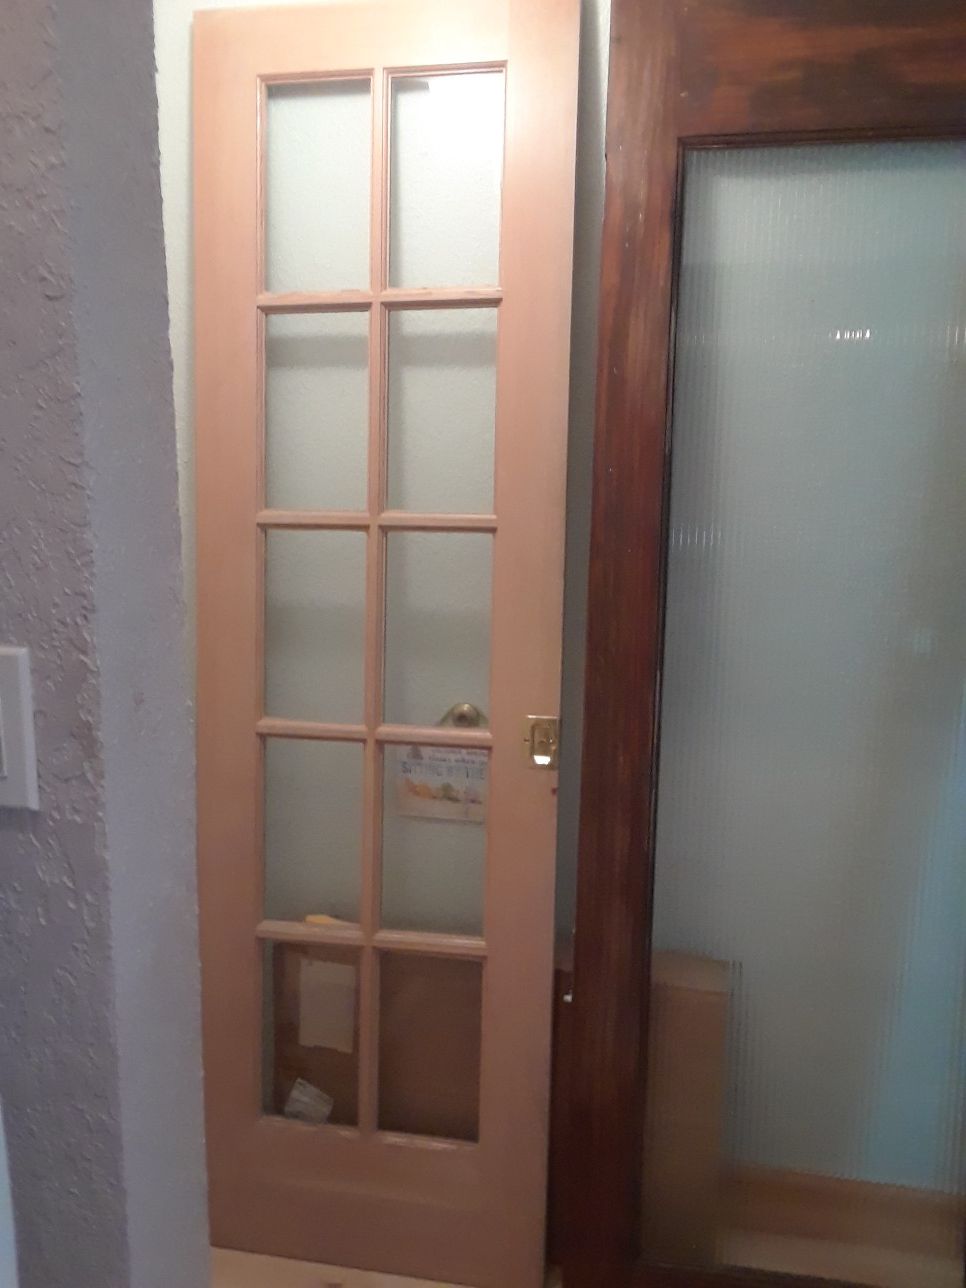 Originally 1/2 of Sliding French Door, 24 x 79.5, plain wood, clear glass panels $50. Sturdy. For pick up. Sliding door brass handle No hinges